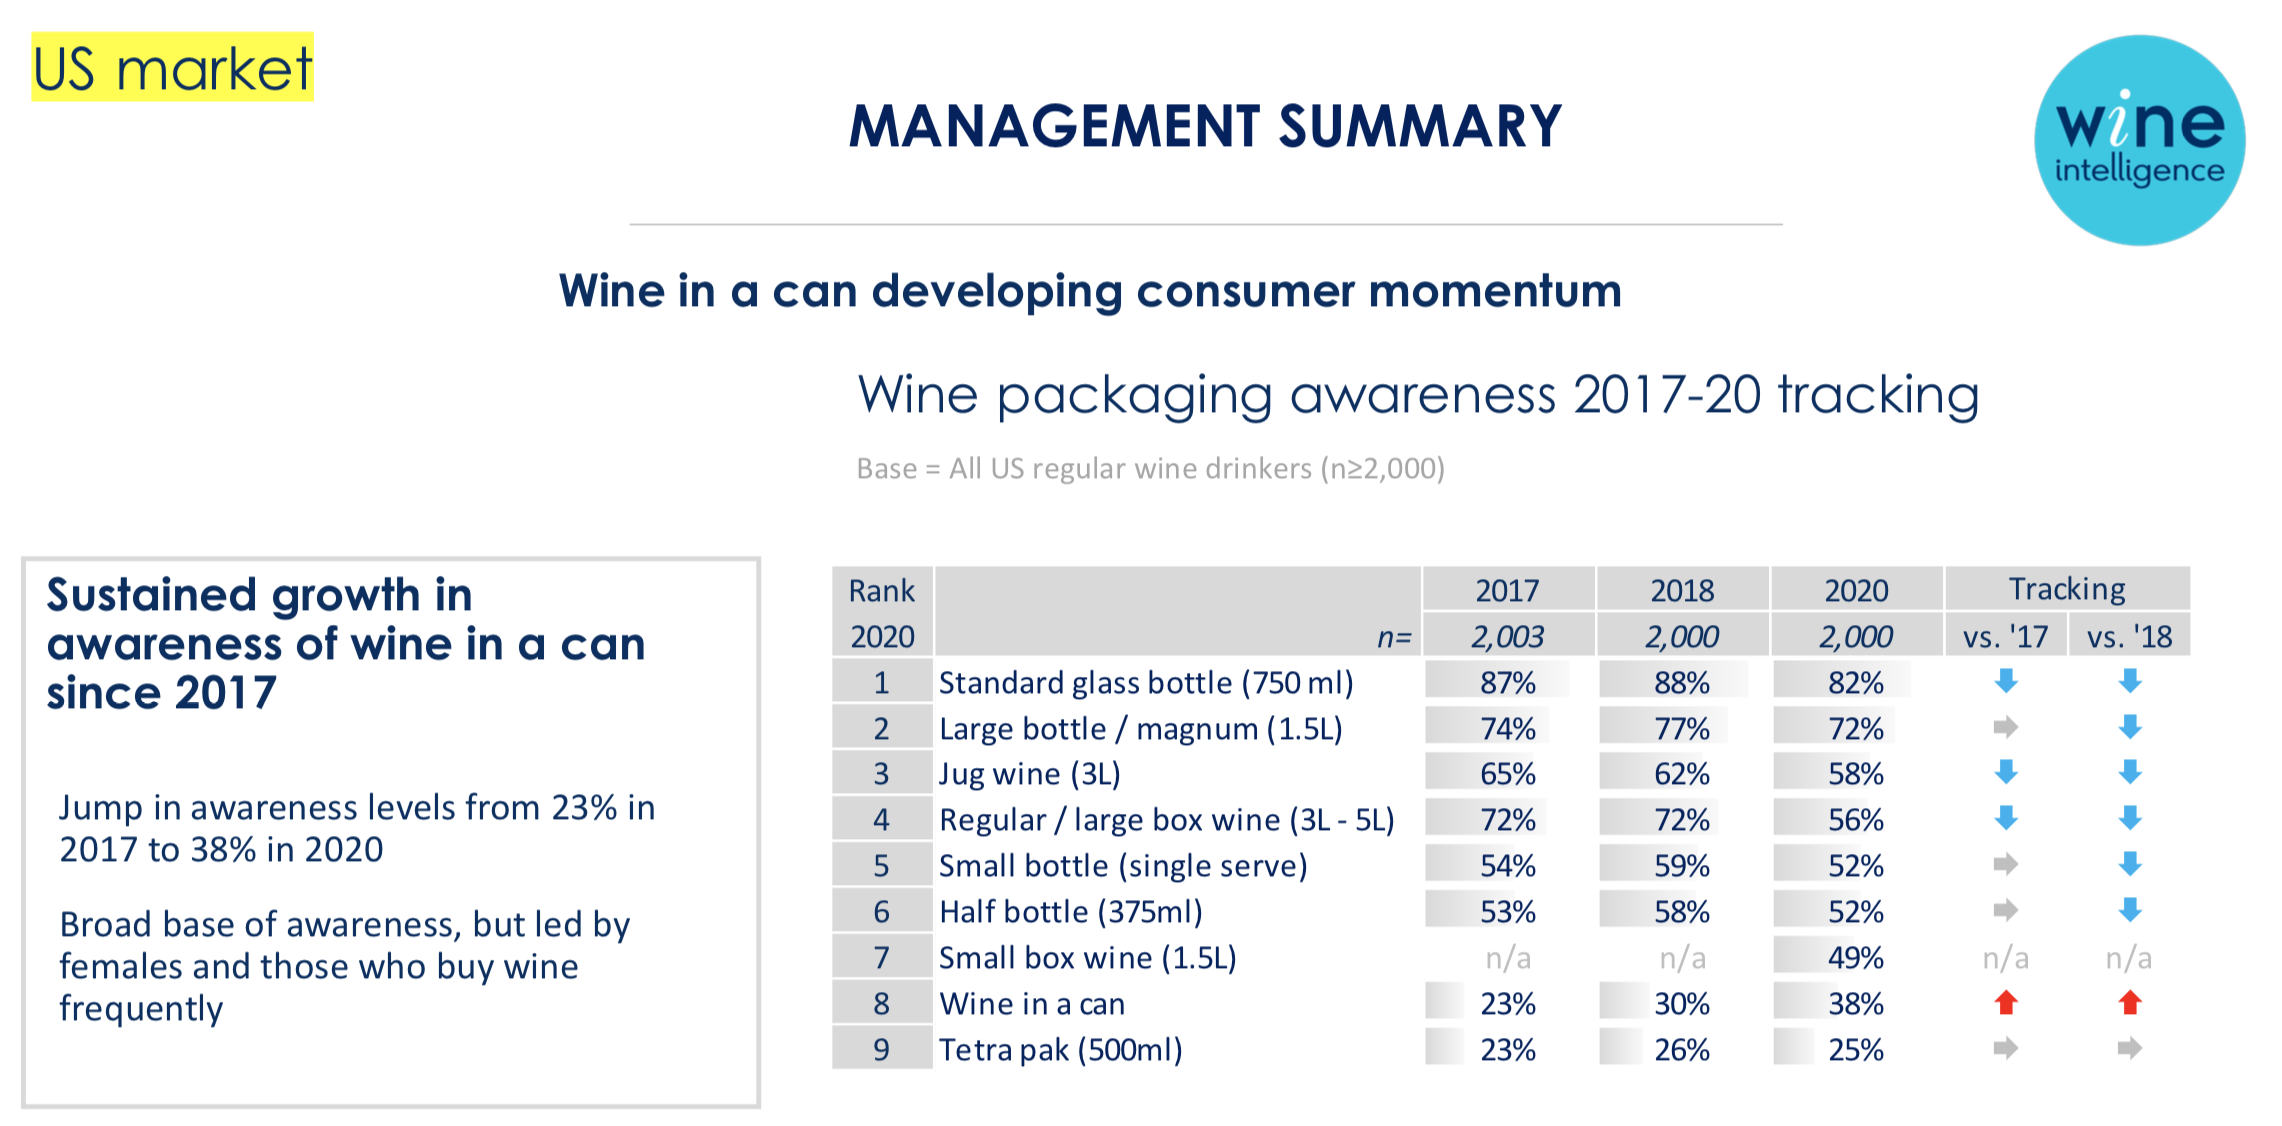 Although consumer awareness of wine in can as a product has increased, it still remains relatively low.